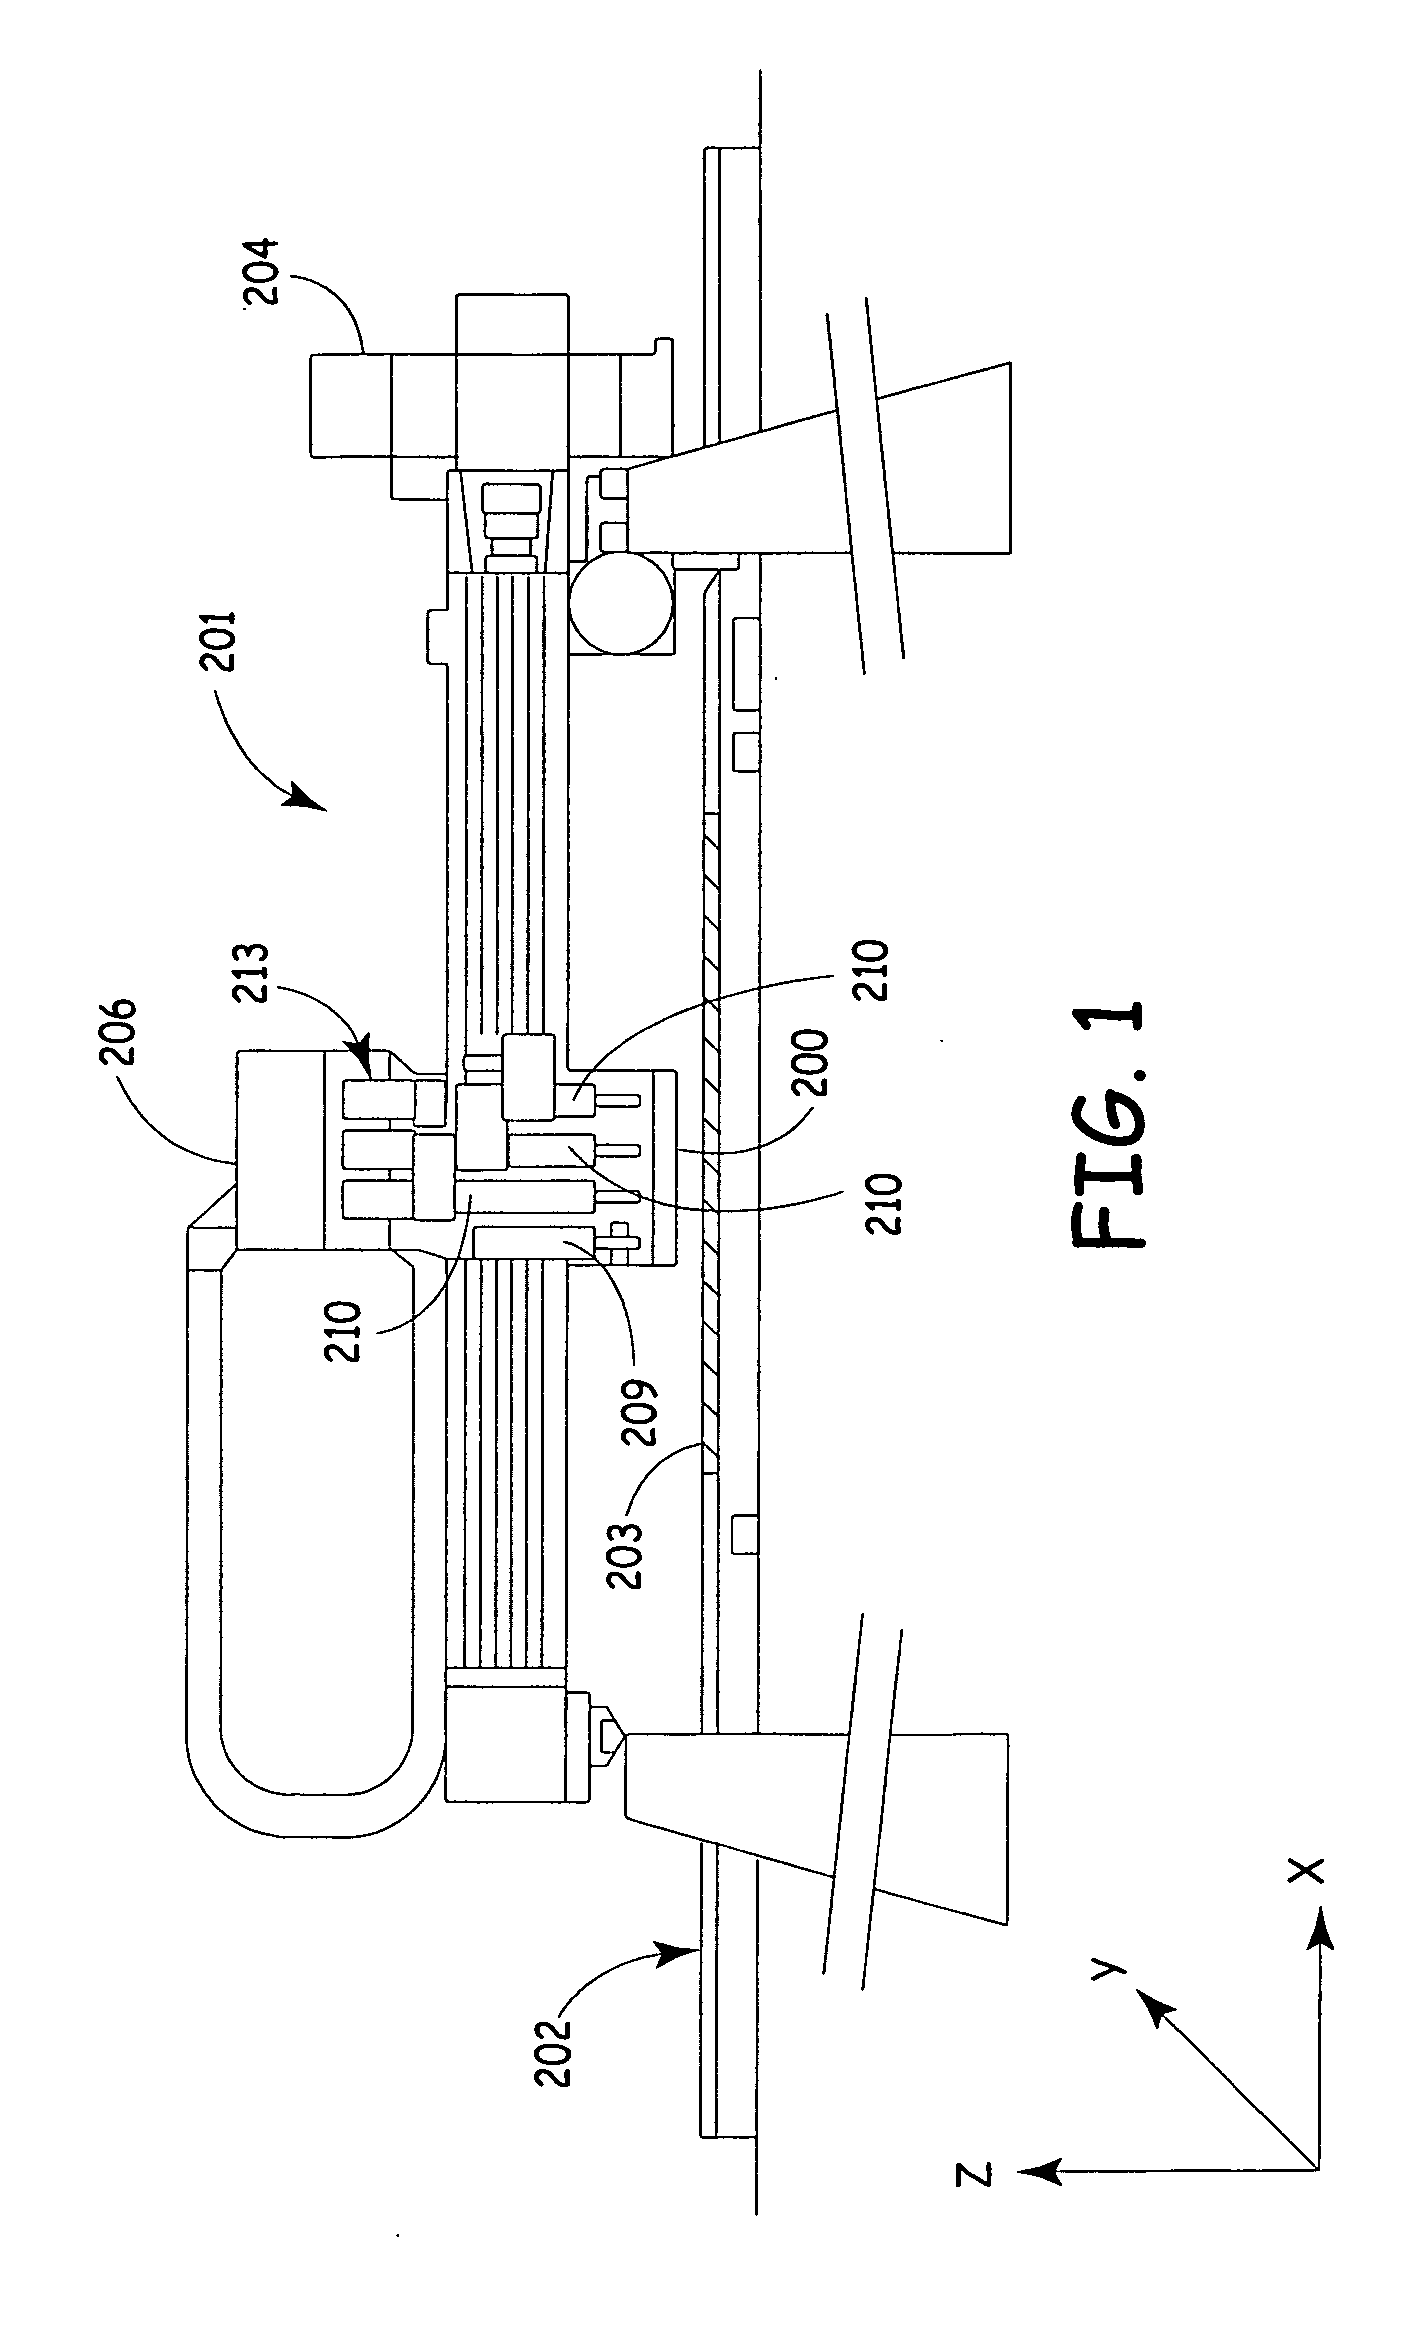 Pick and place machine with improved setup and operation procedure